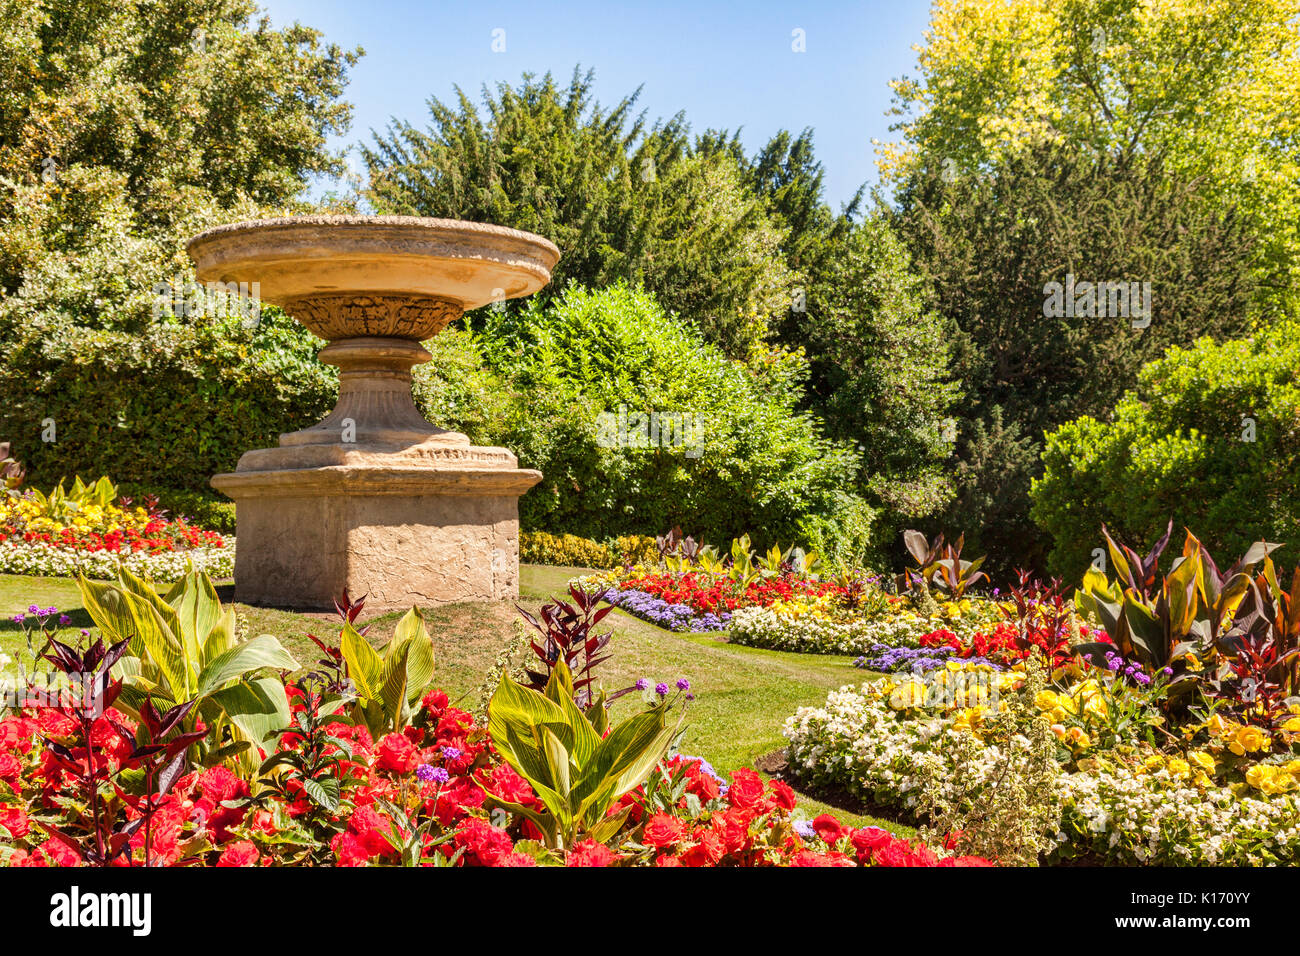 Flower beds filled with annuals in public gardens in Bath, Somerset, Englanmd, UK Stock Photo